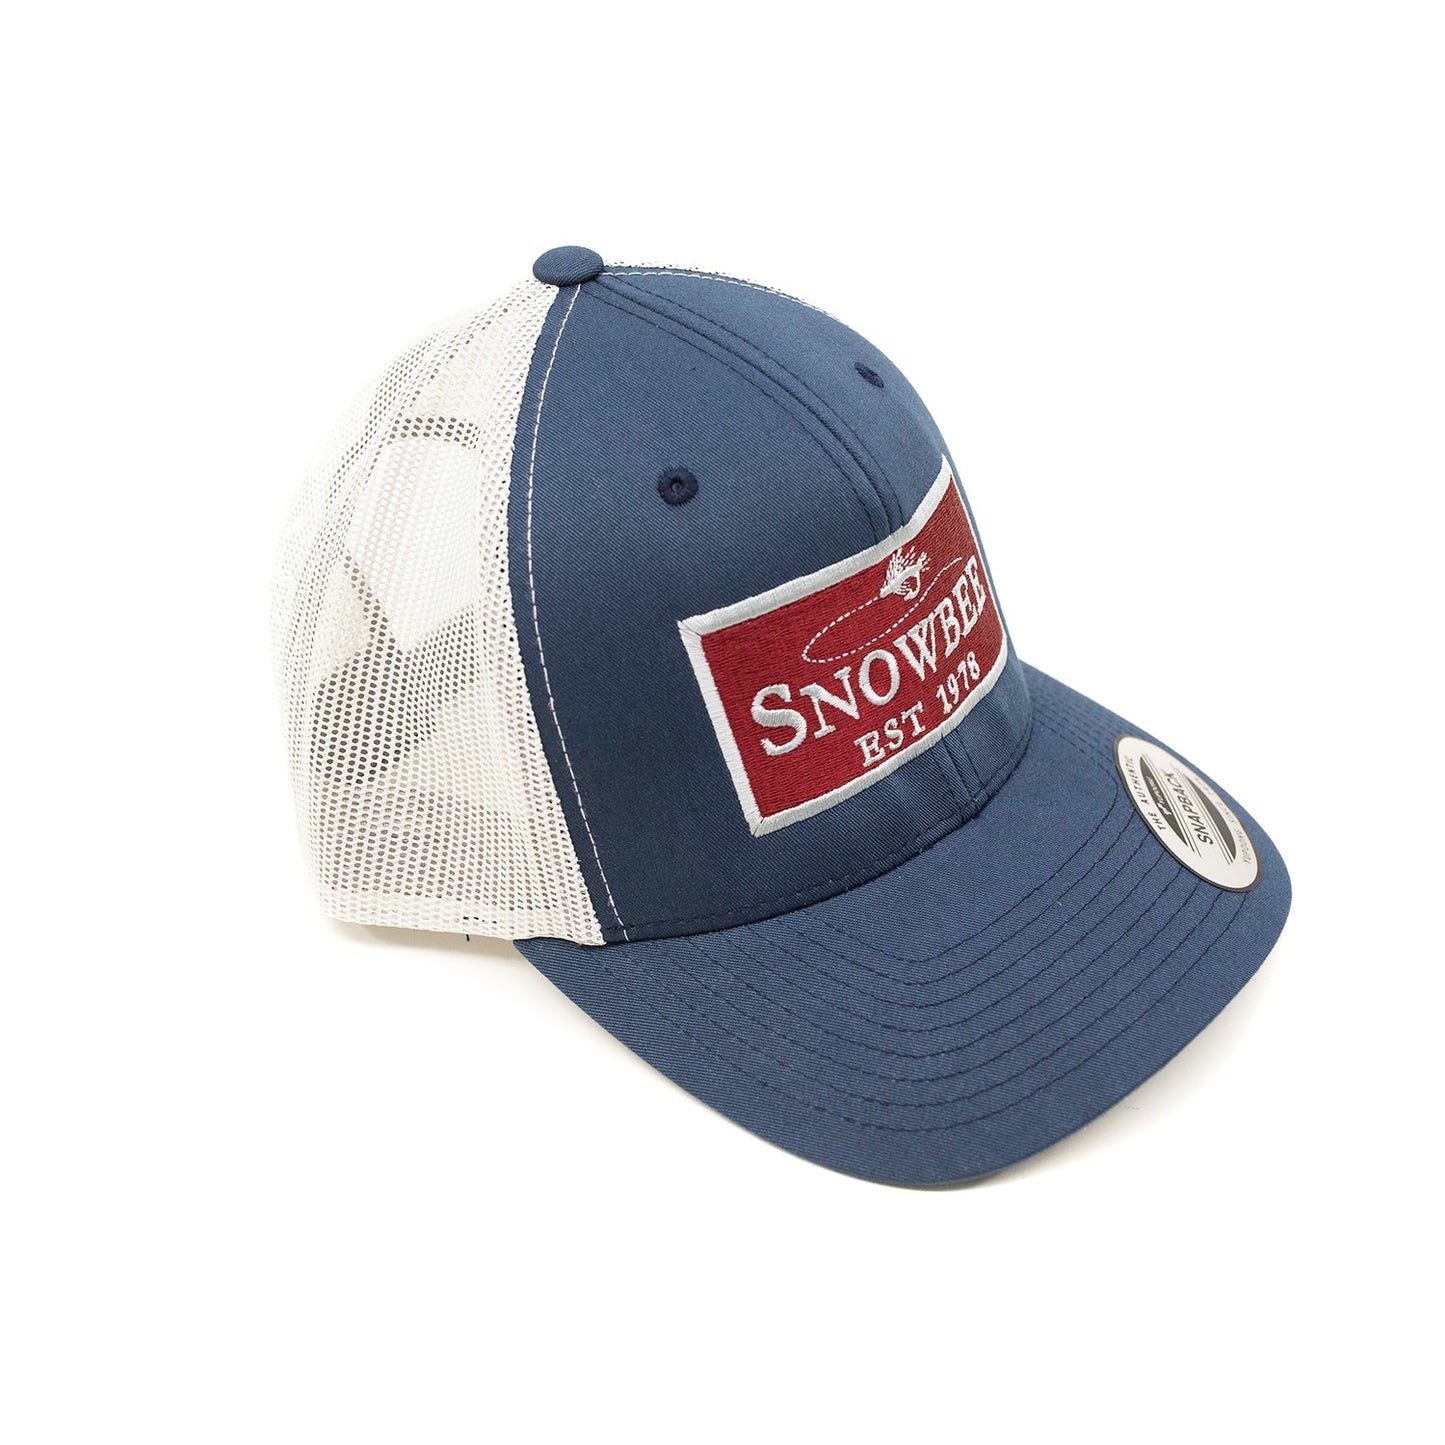 Silver/Blue Fly Badge Retro Trucker Hat by Snowbee USA